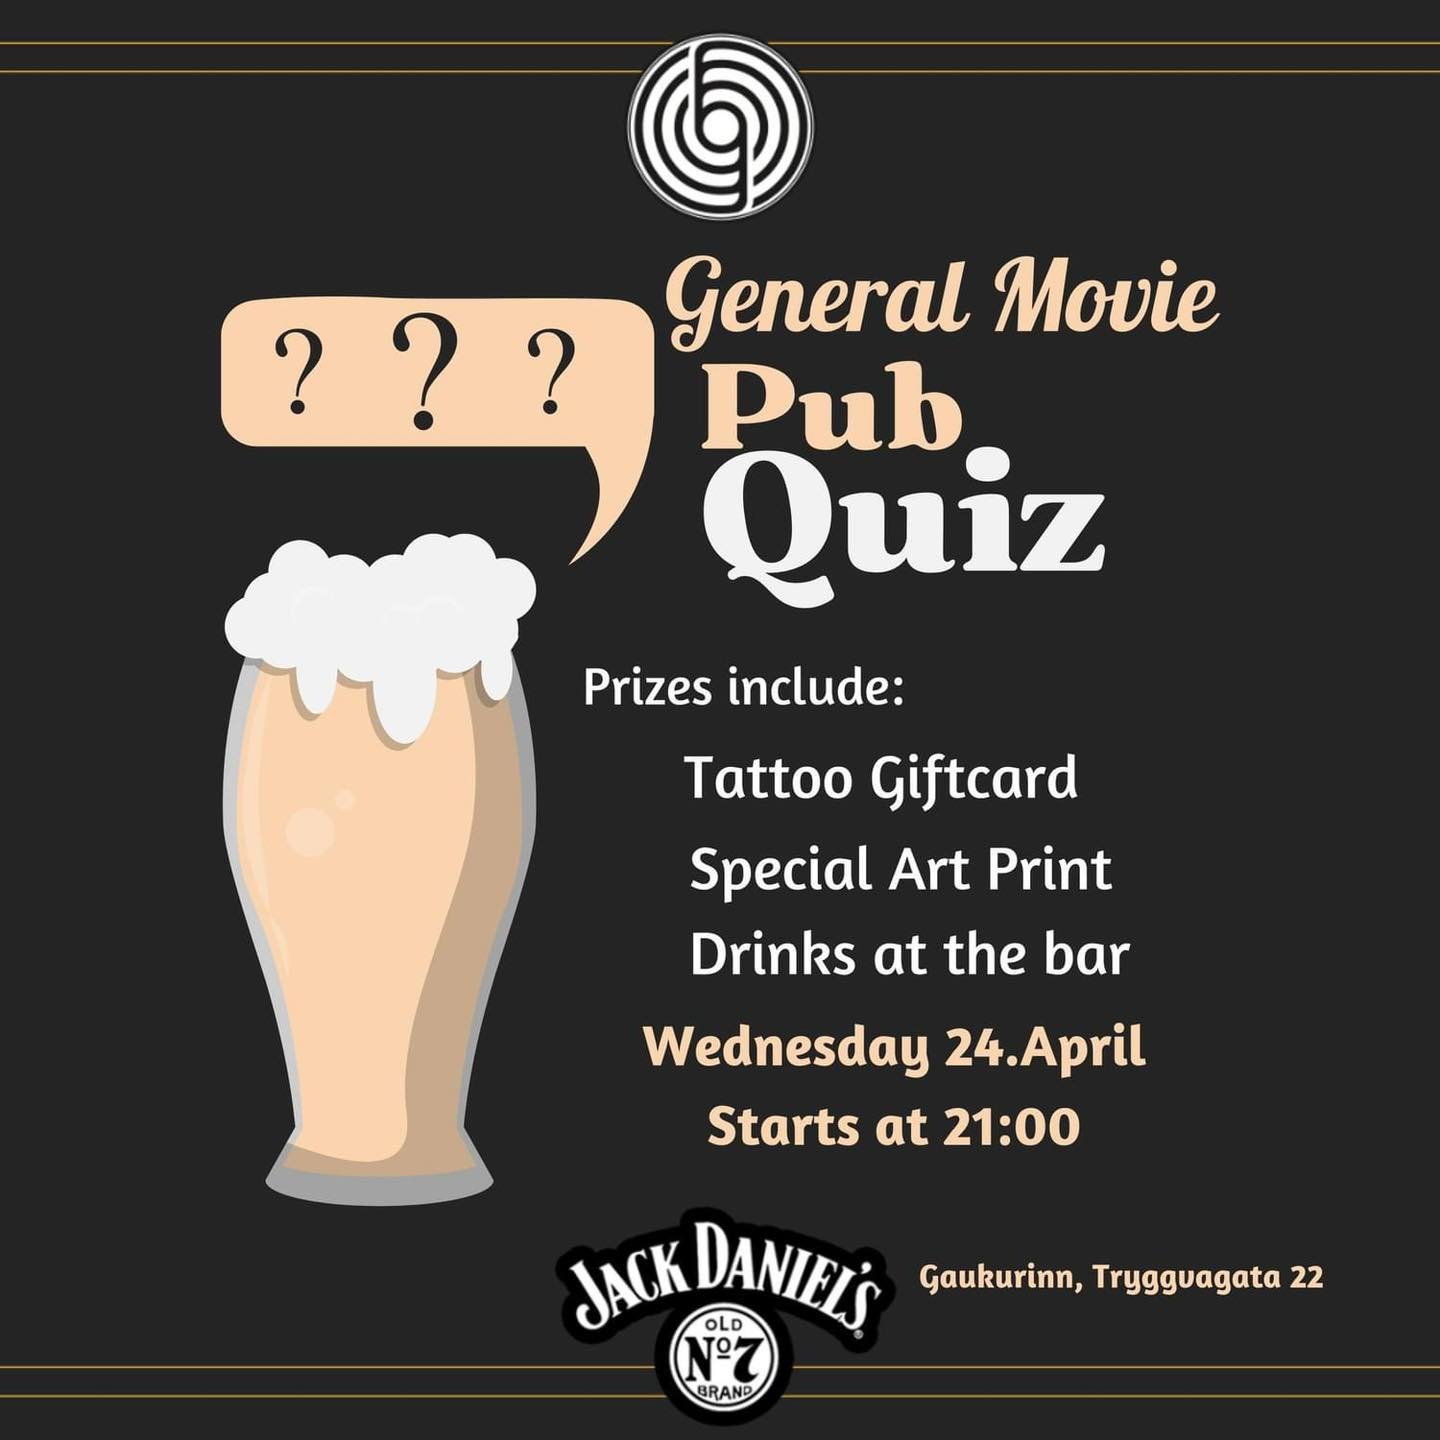 TONIGHT we have a PUB QUIZ, with some AMAZING Prizes, as well as we have some NEW liquids at the bar🔥🔥🥳
COME ON DOWN, and show us how smart and funny you are, for this is not your basic Pub quiz🤘💅🔥